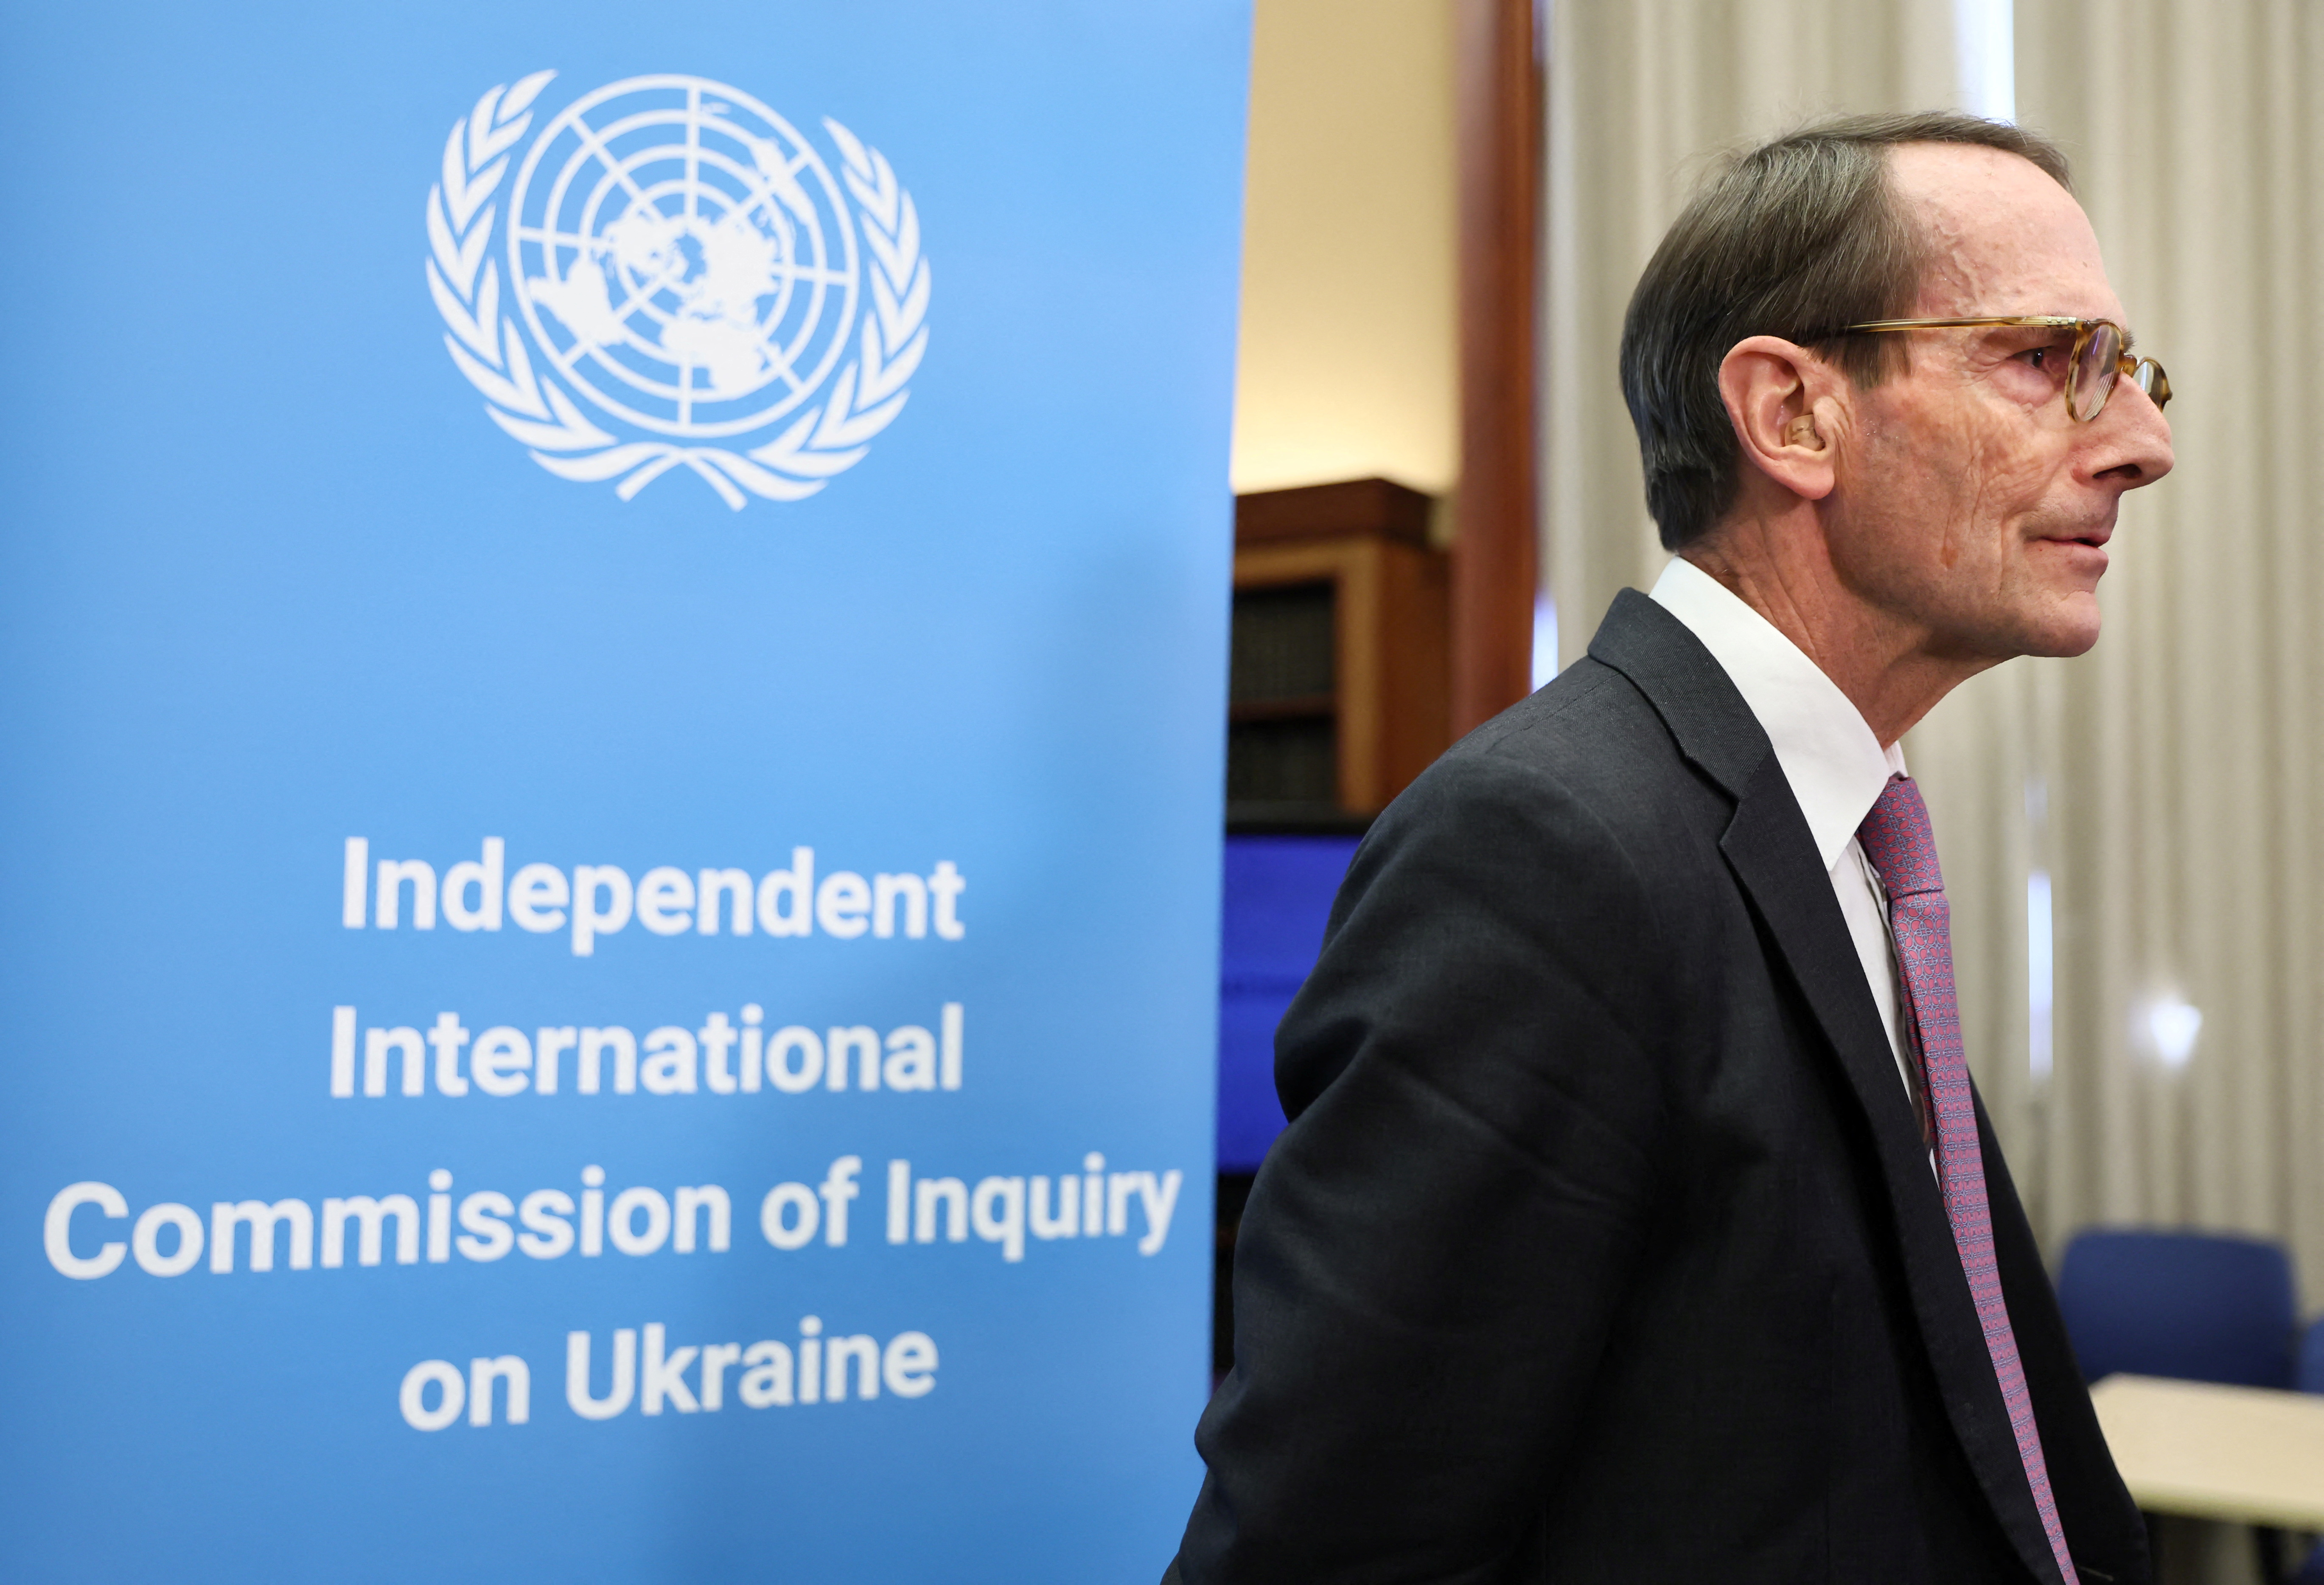 Independent International Commission of Inquiry on Ukraine news conference in Geneva